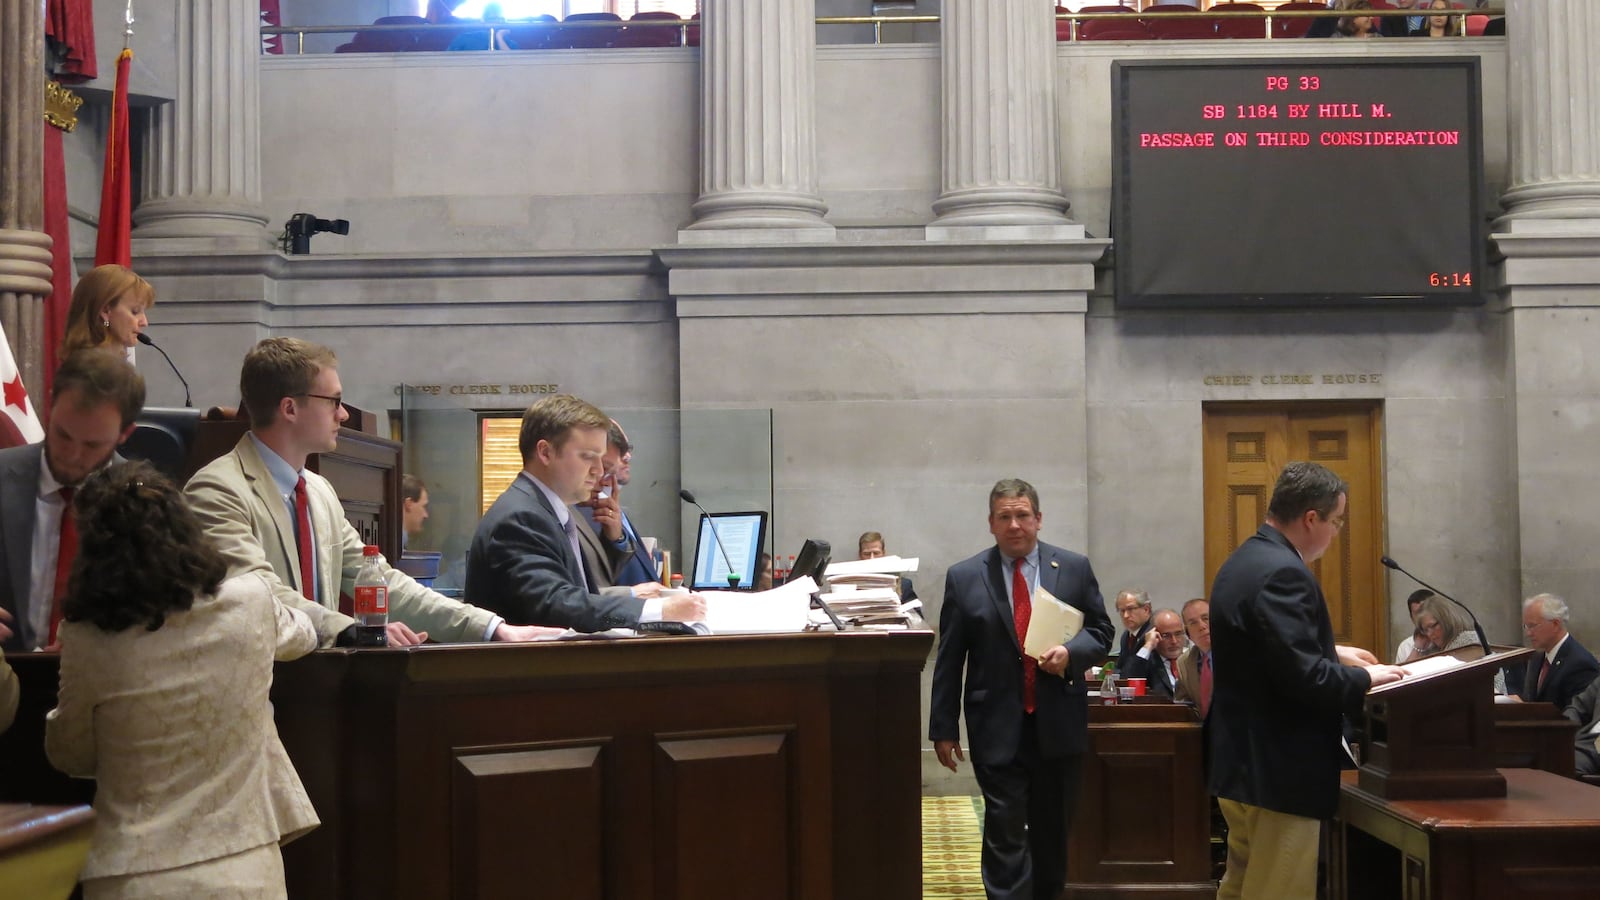 House Speaker Beth Harwell leads the penultimate floor session Monday of the 109th Tennessee General Assembly.